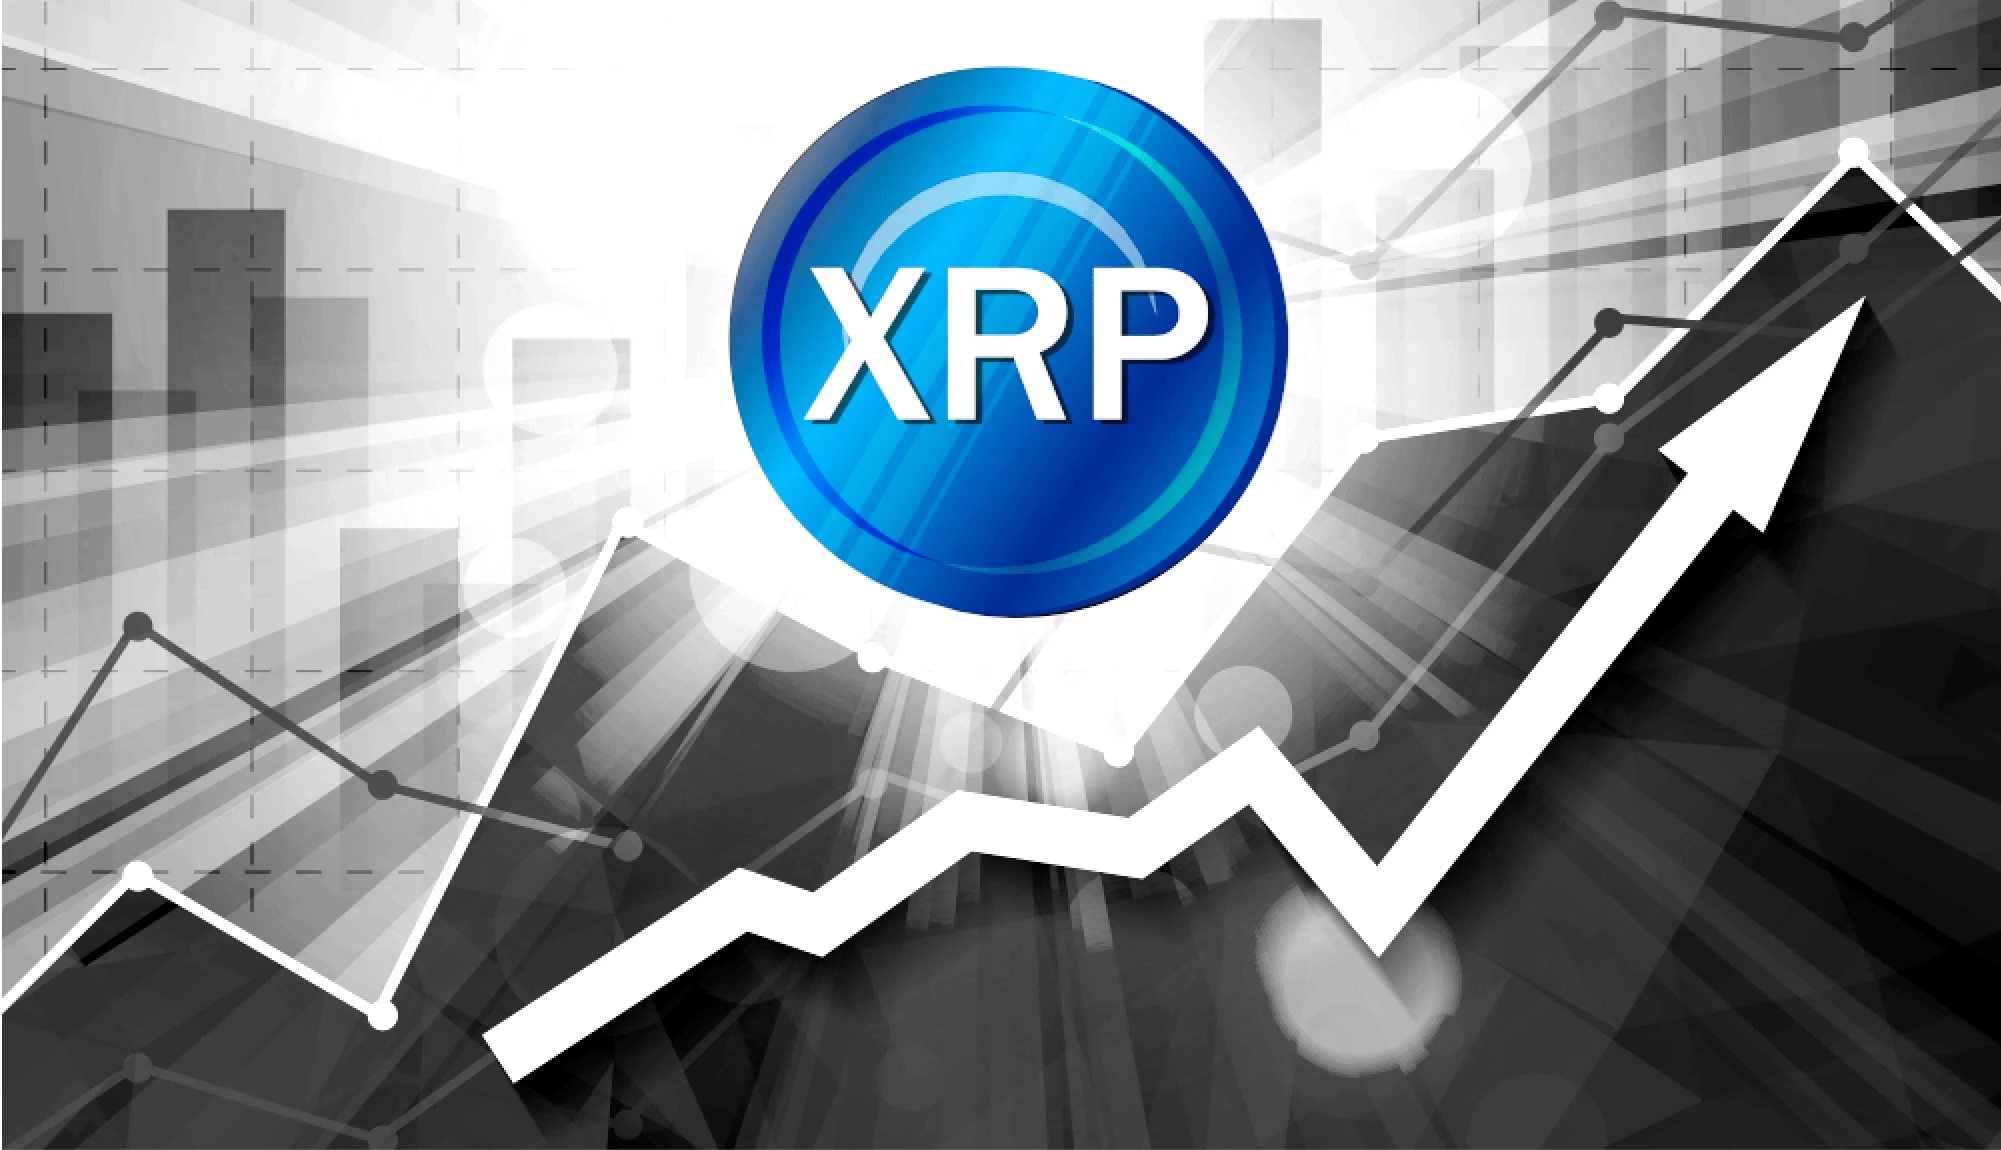 ChatGPT's Optimistic Forecast for XRP's Price Growth